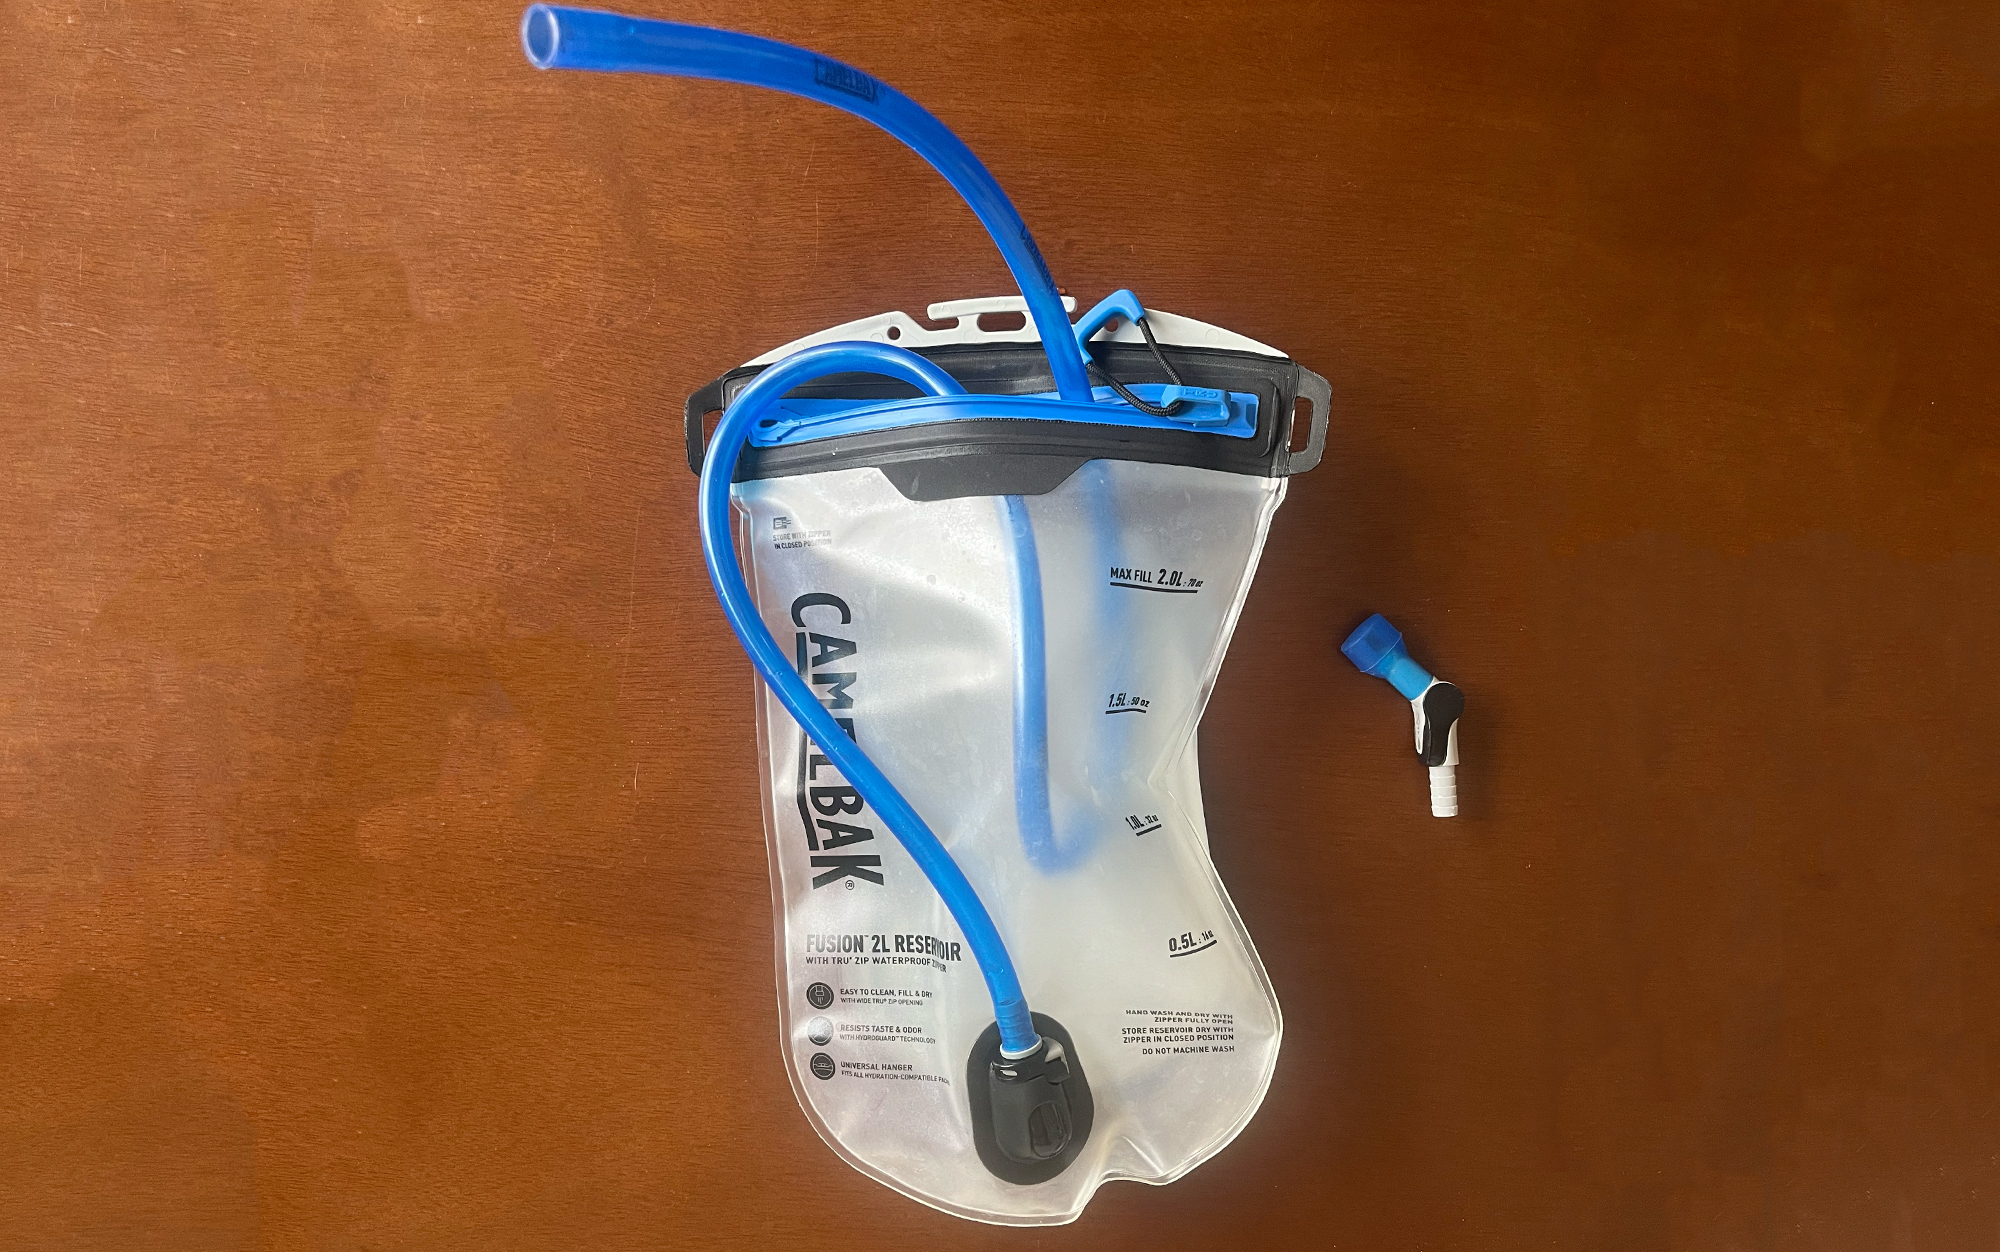 Fully dry your hydration bladder after every use and especially before storing.